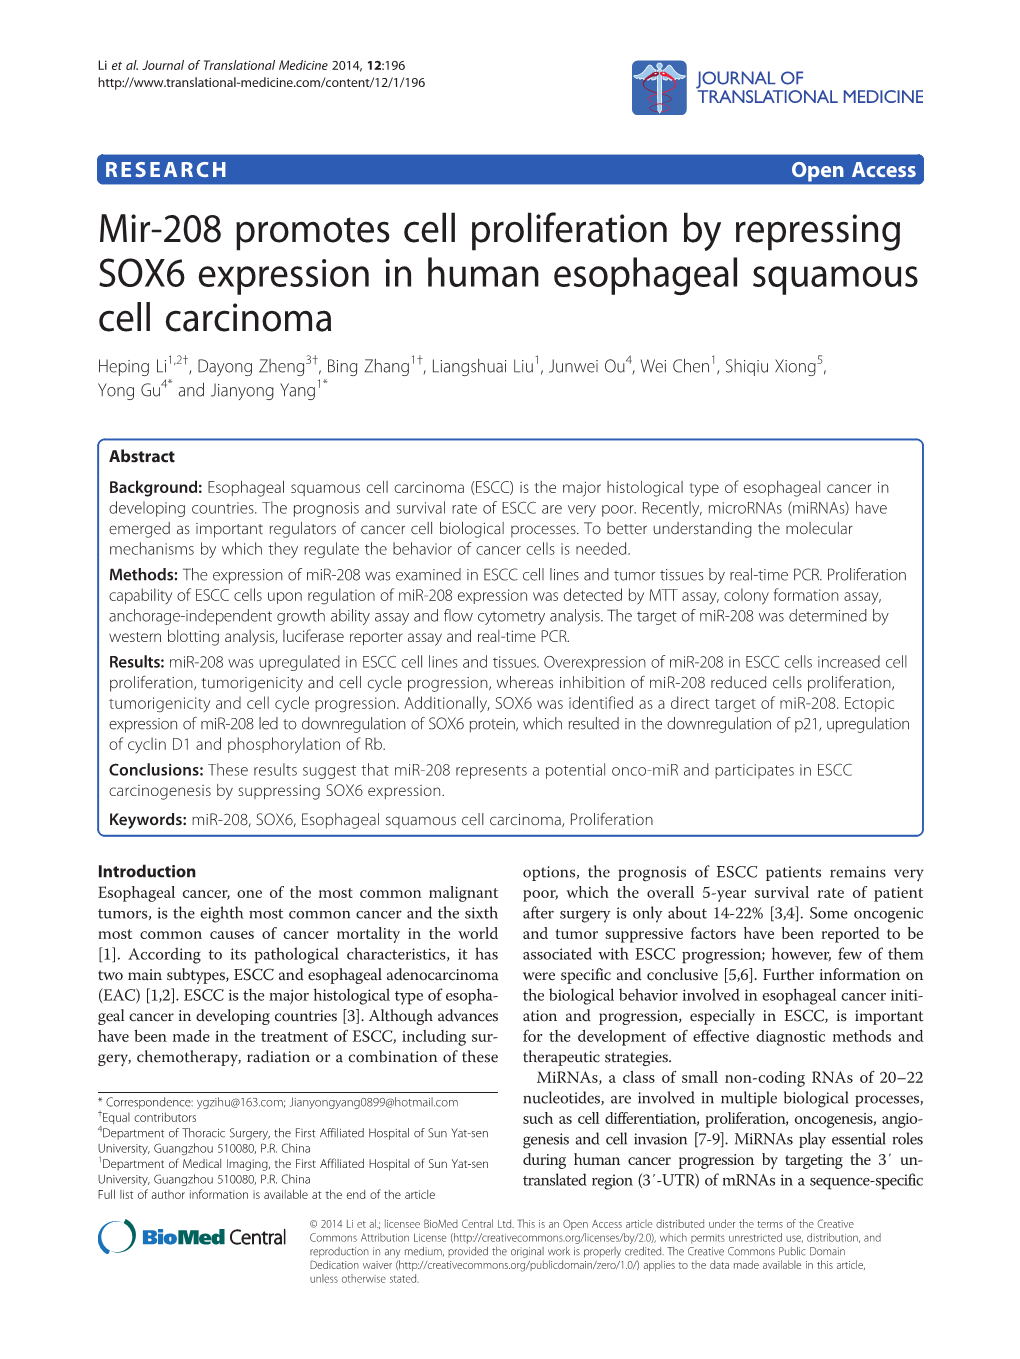 Mir-208 Promotes Cell Proliferation by Repressing SOX6 Expression in Human Esophageal Squamous Cell Carcinoma